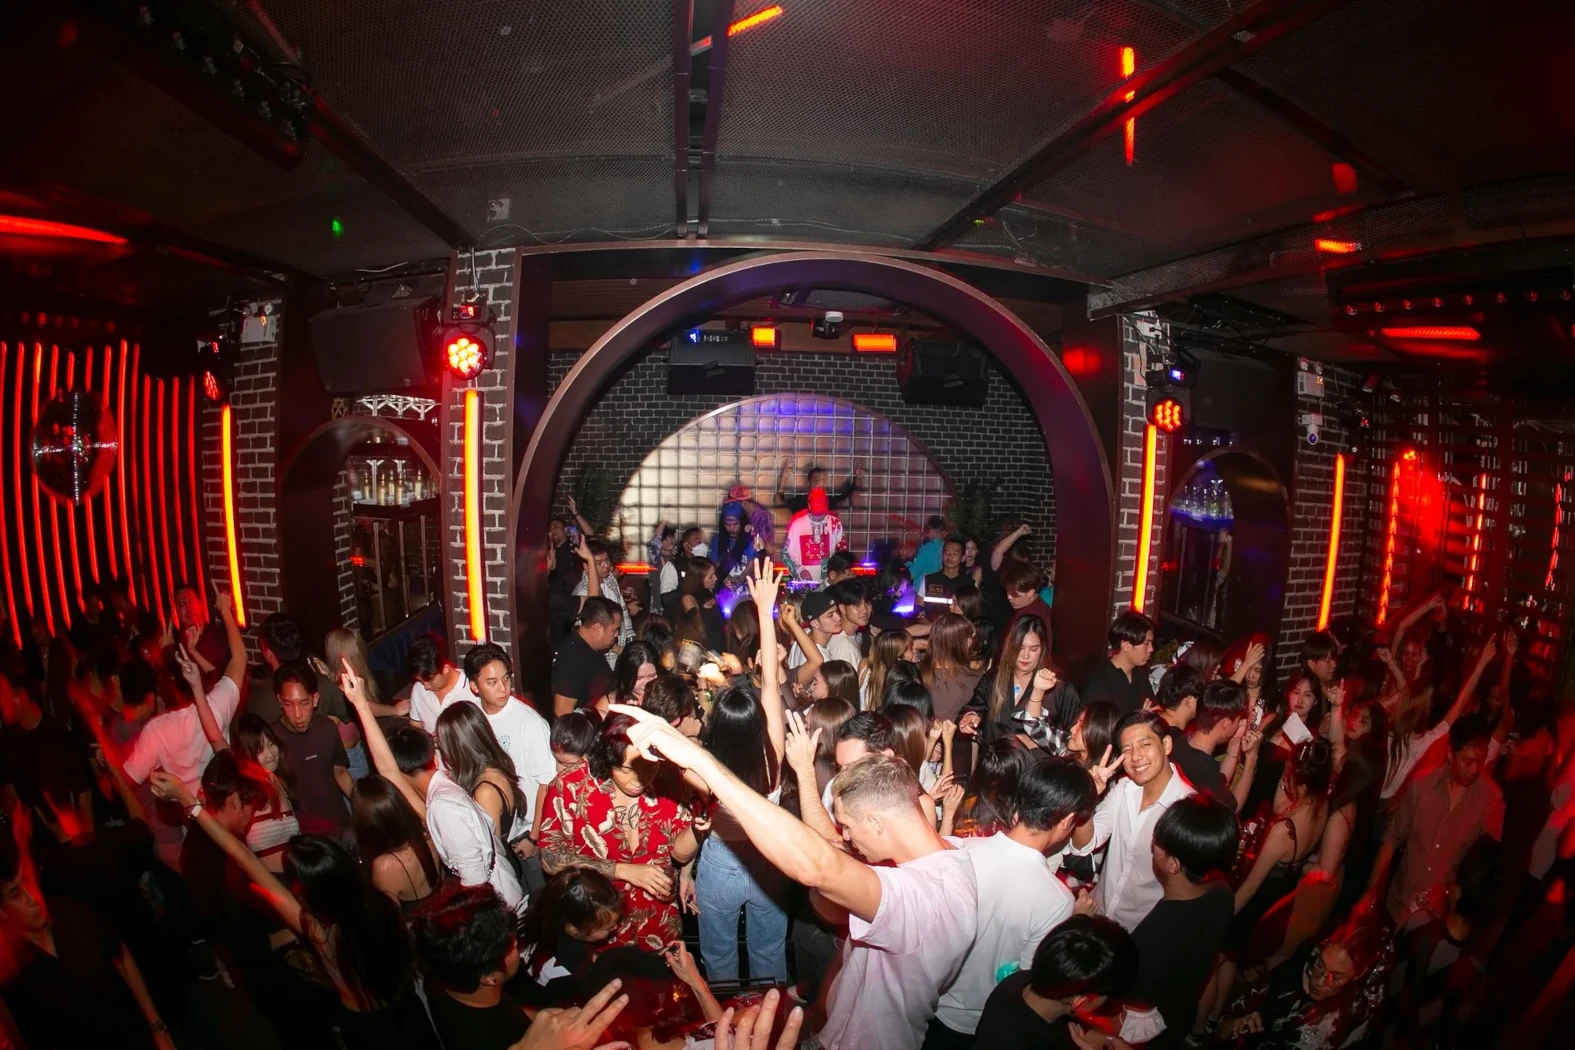 Great party with a lot of people dancing at Sway Club Bangkok